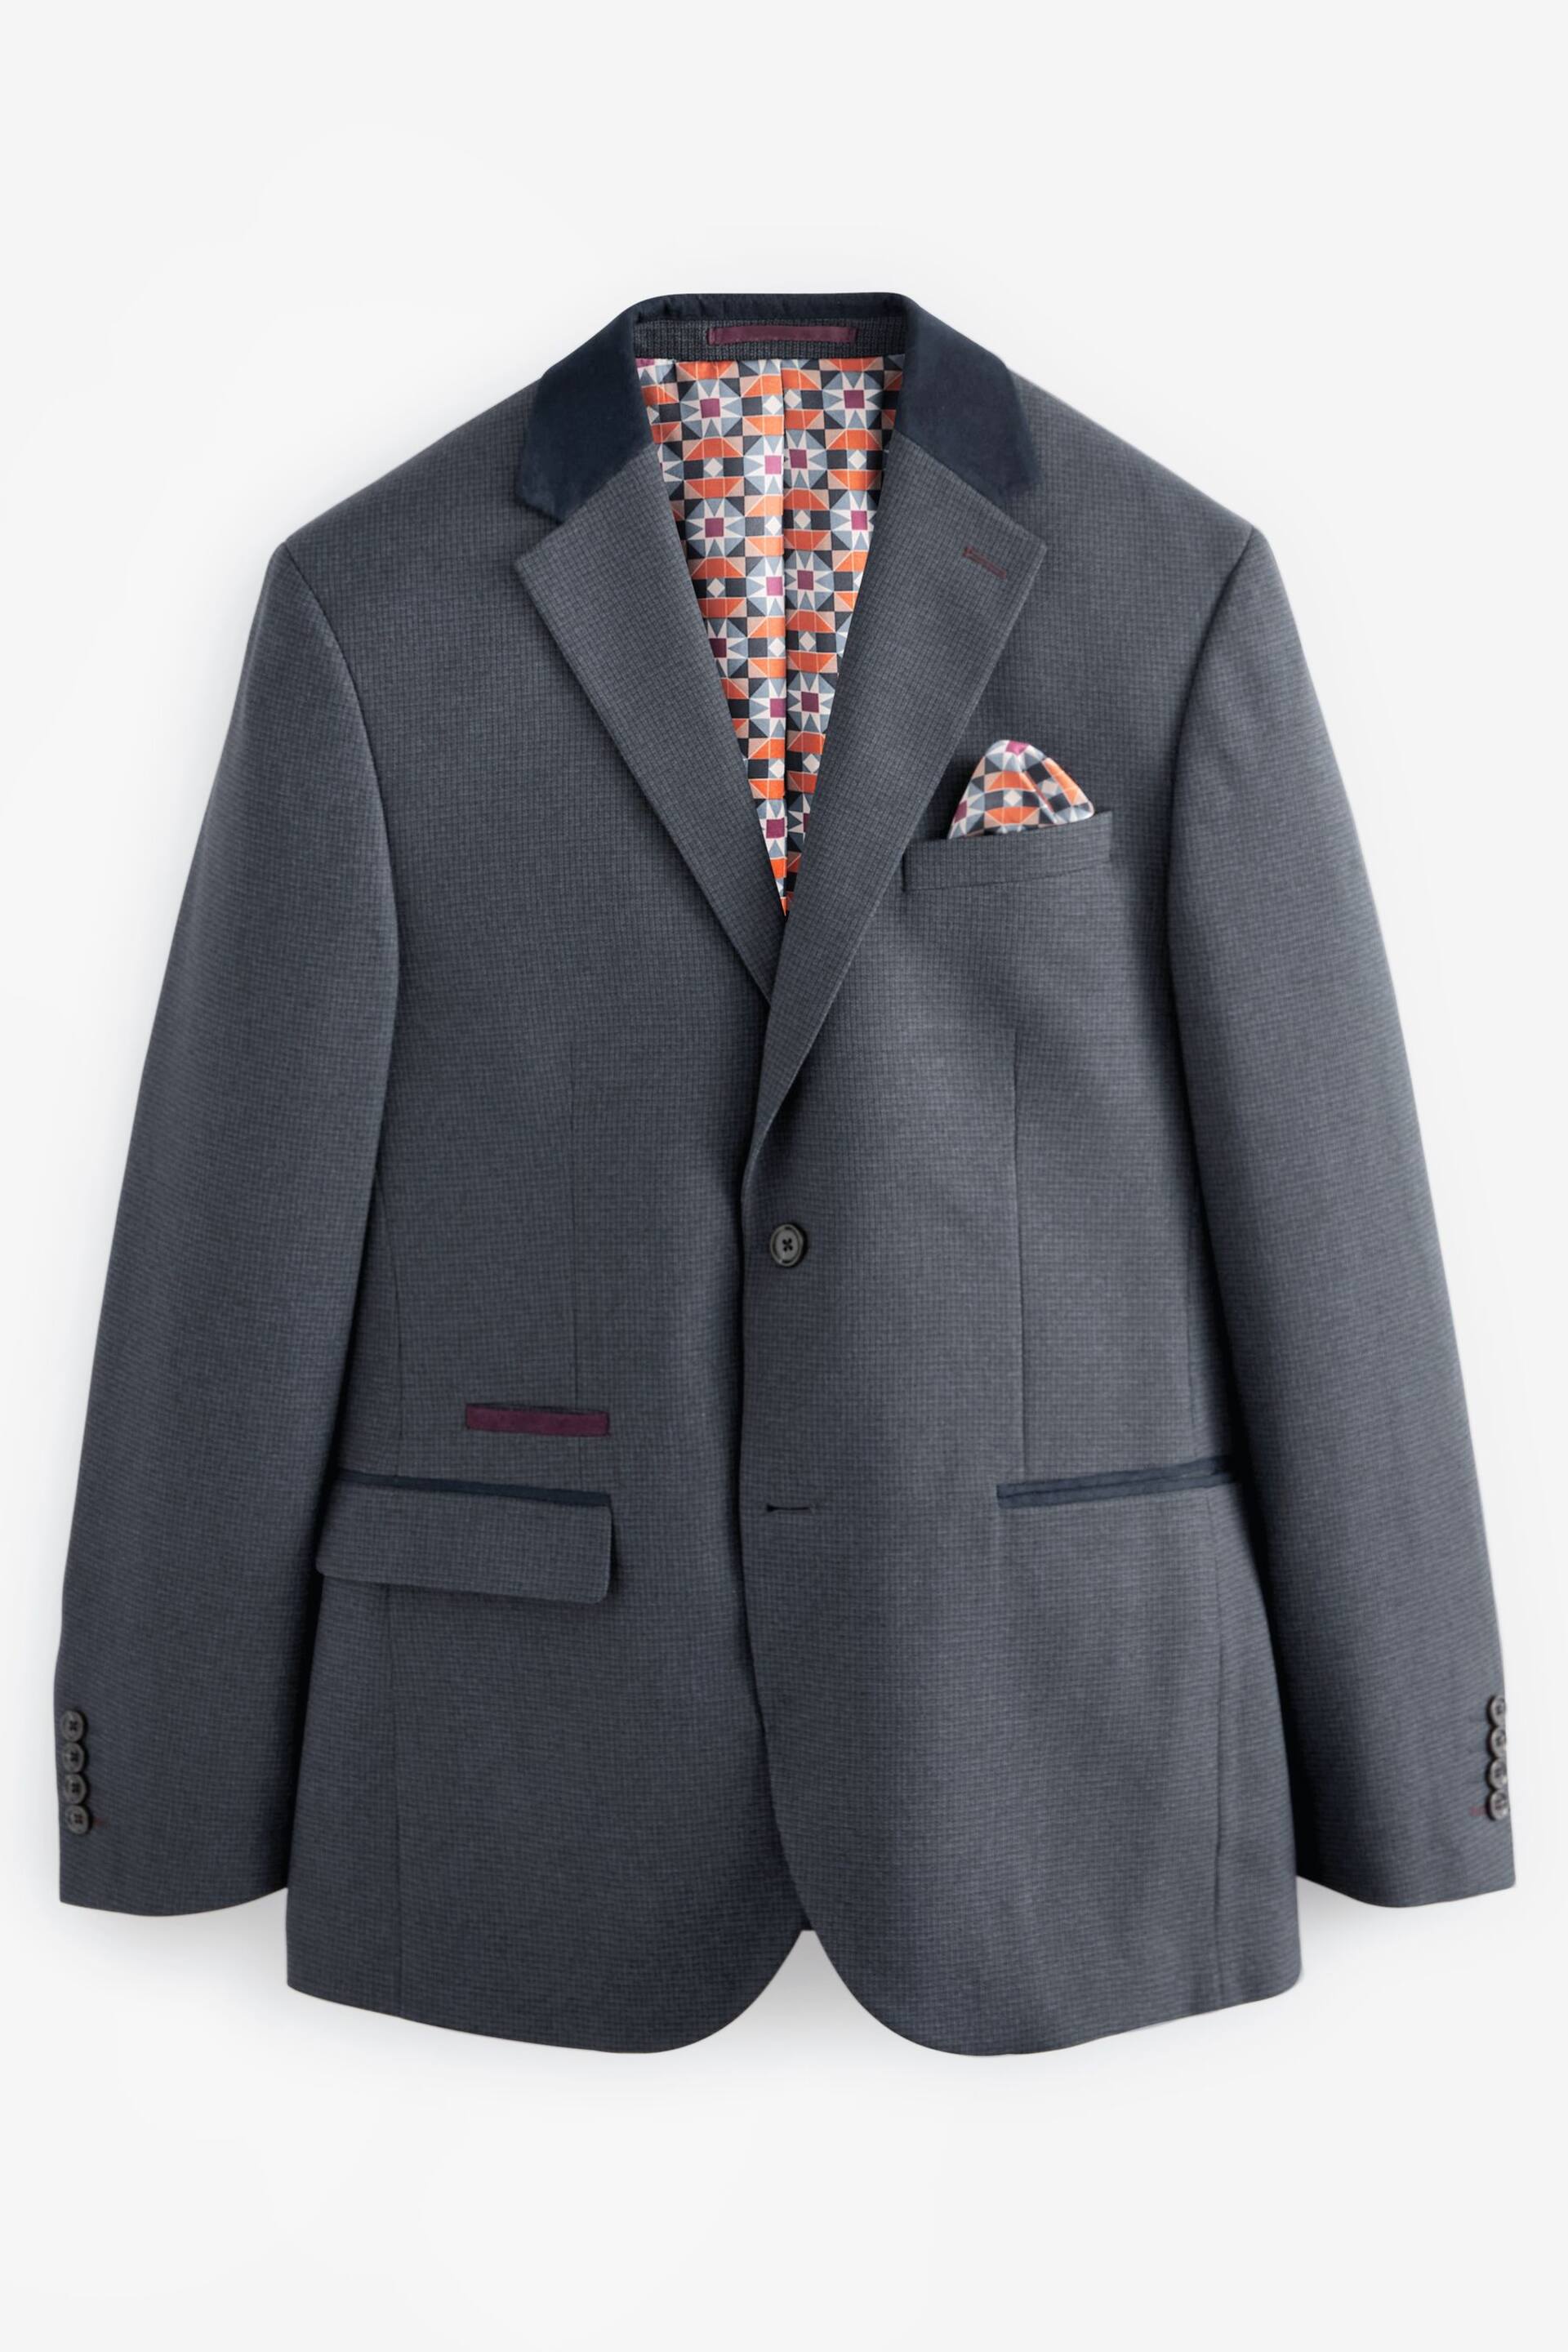 Navy Blue Trimmed Textured Suit Jacket - Image 8 of 12